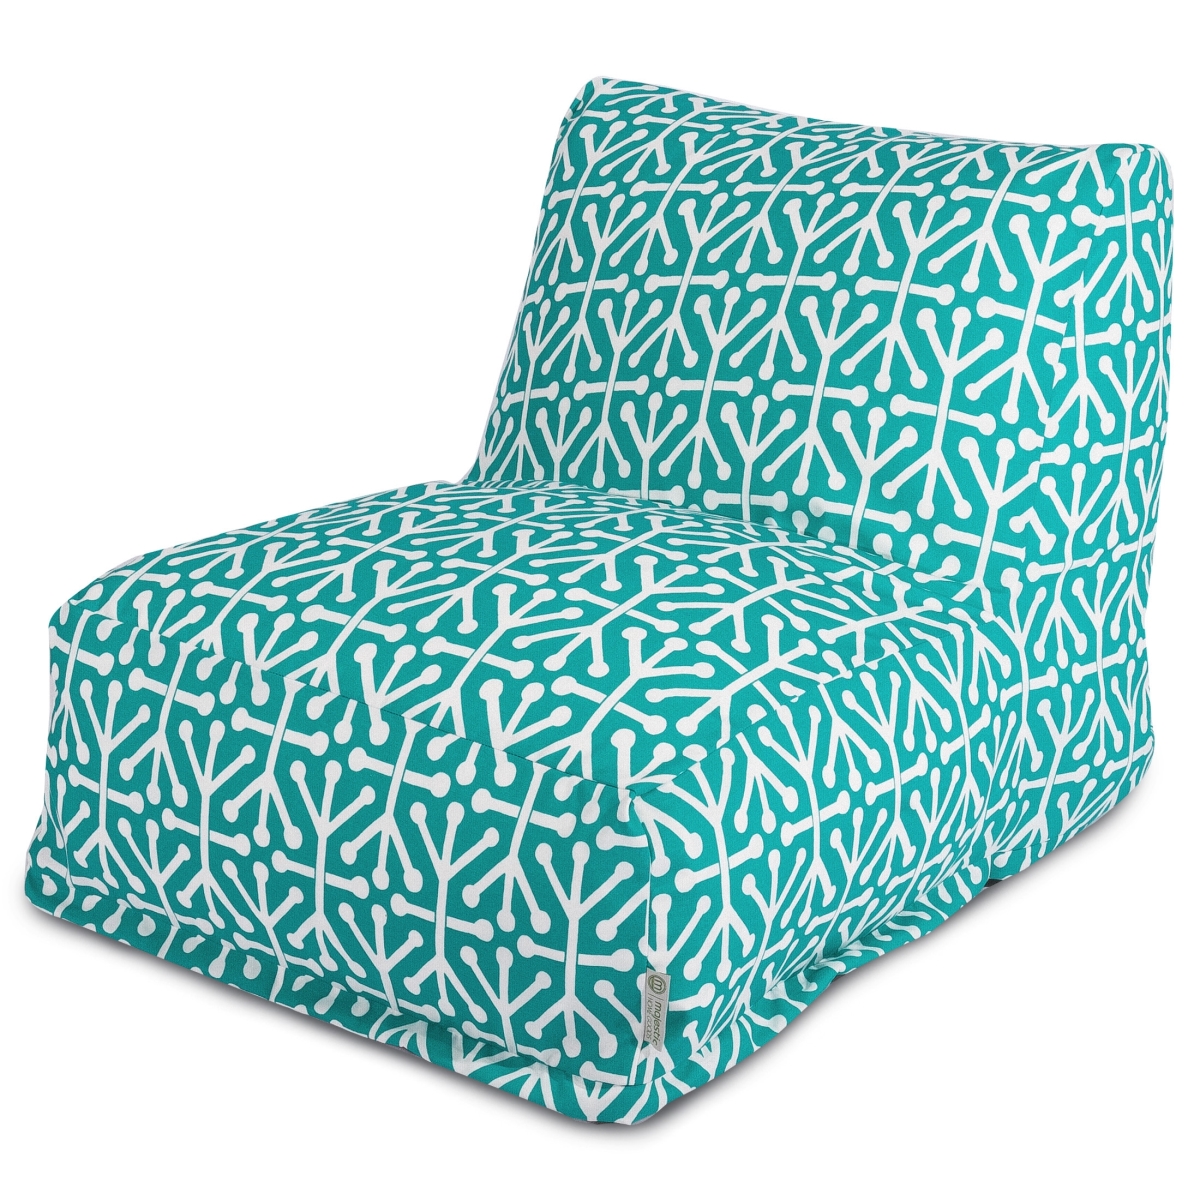 Picture of Majestic Home 85907220387 Pacific Aruba Bean Bag Chair Lounger - 36 x 27 x 24 in.